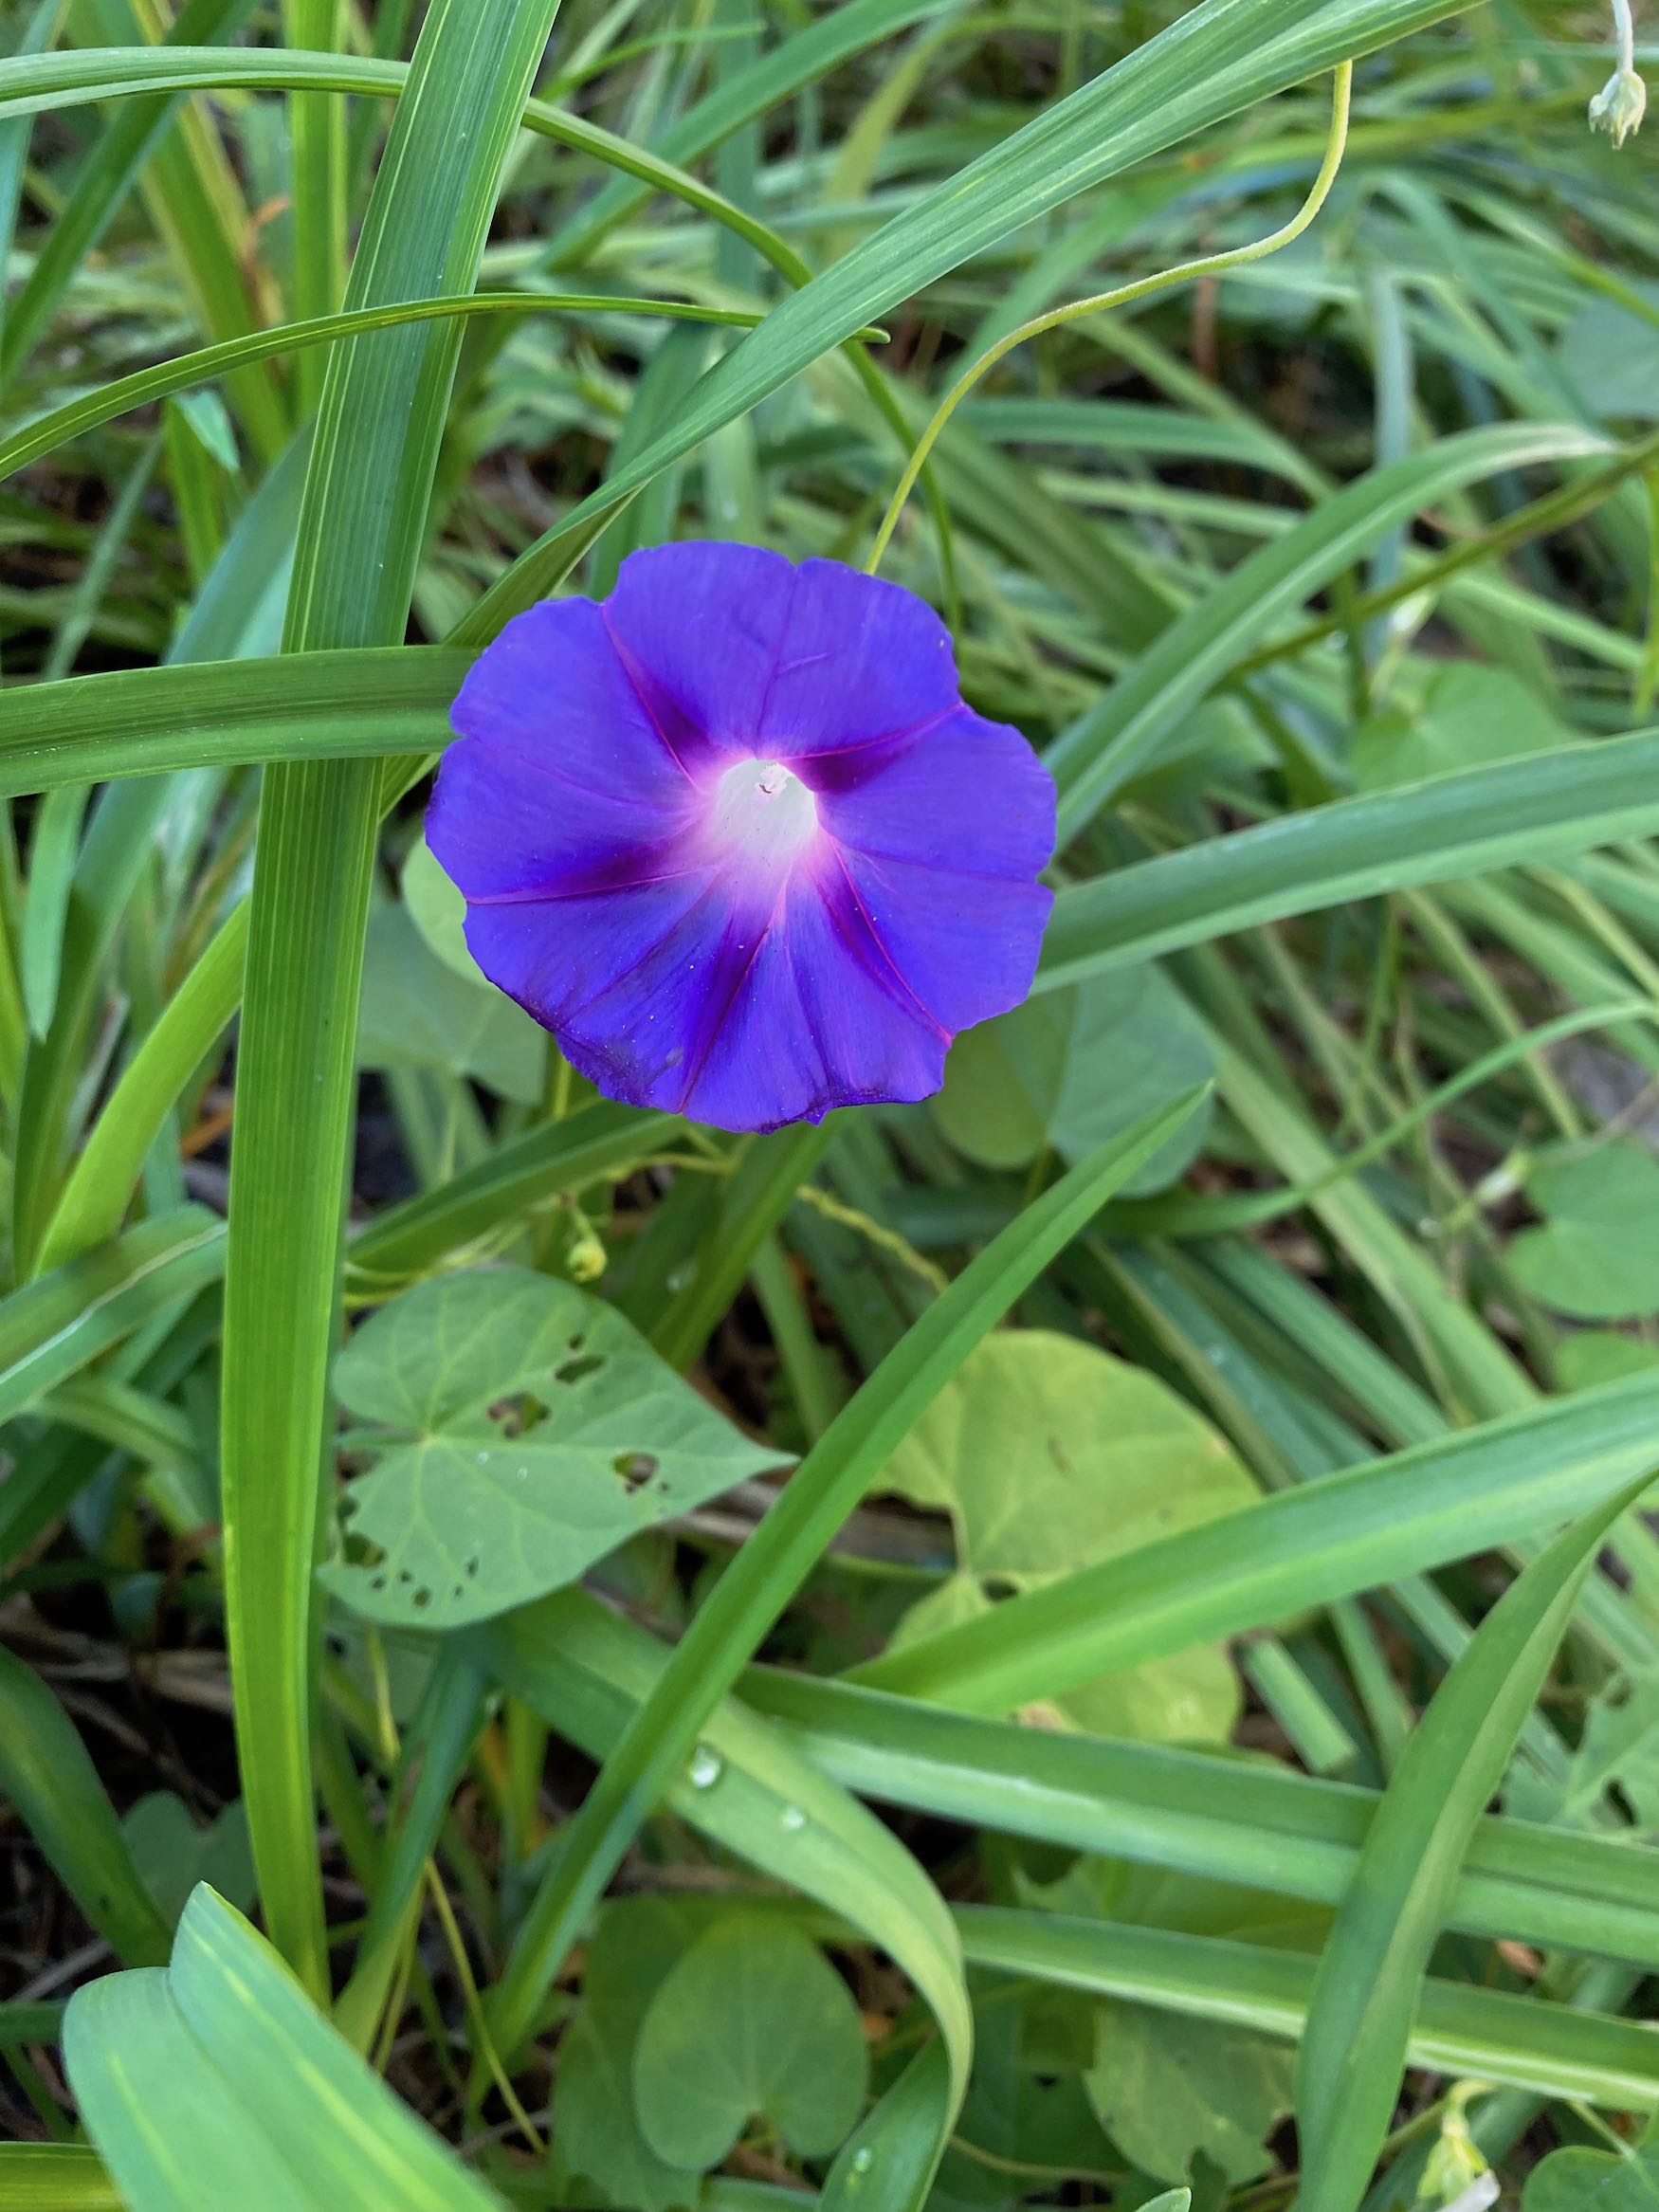 It's the weekend! Number 267, Morning Glory Volunteer in the Grass